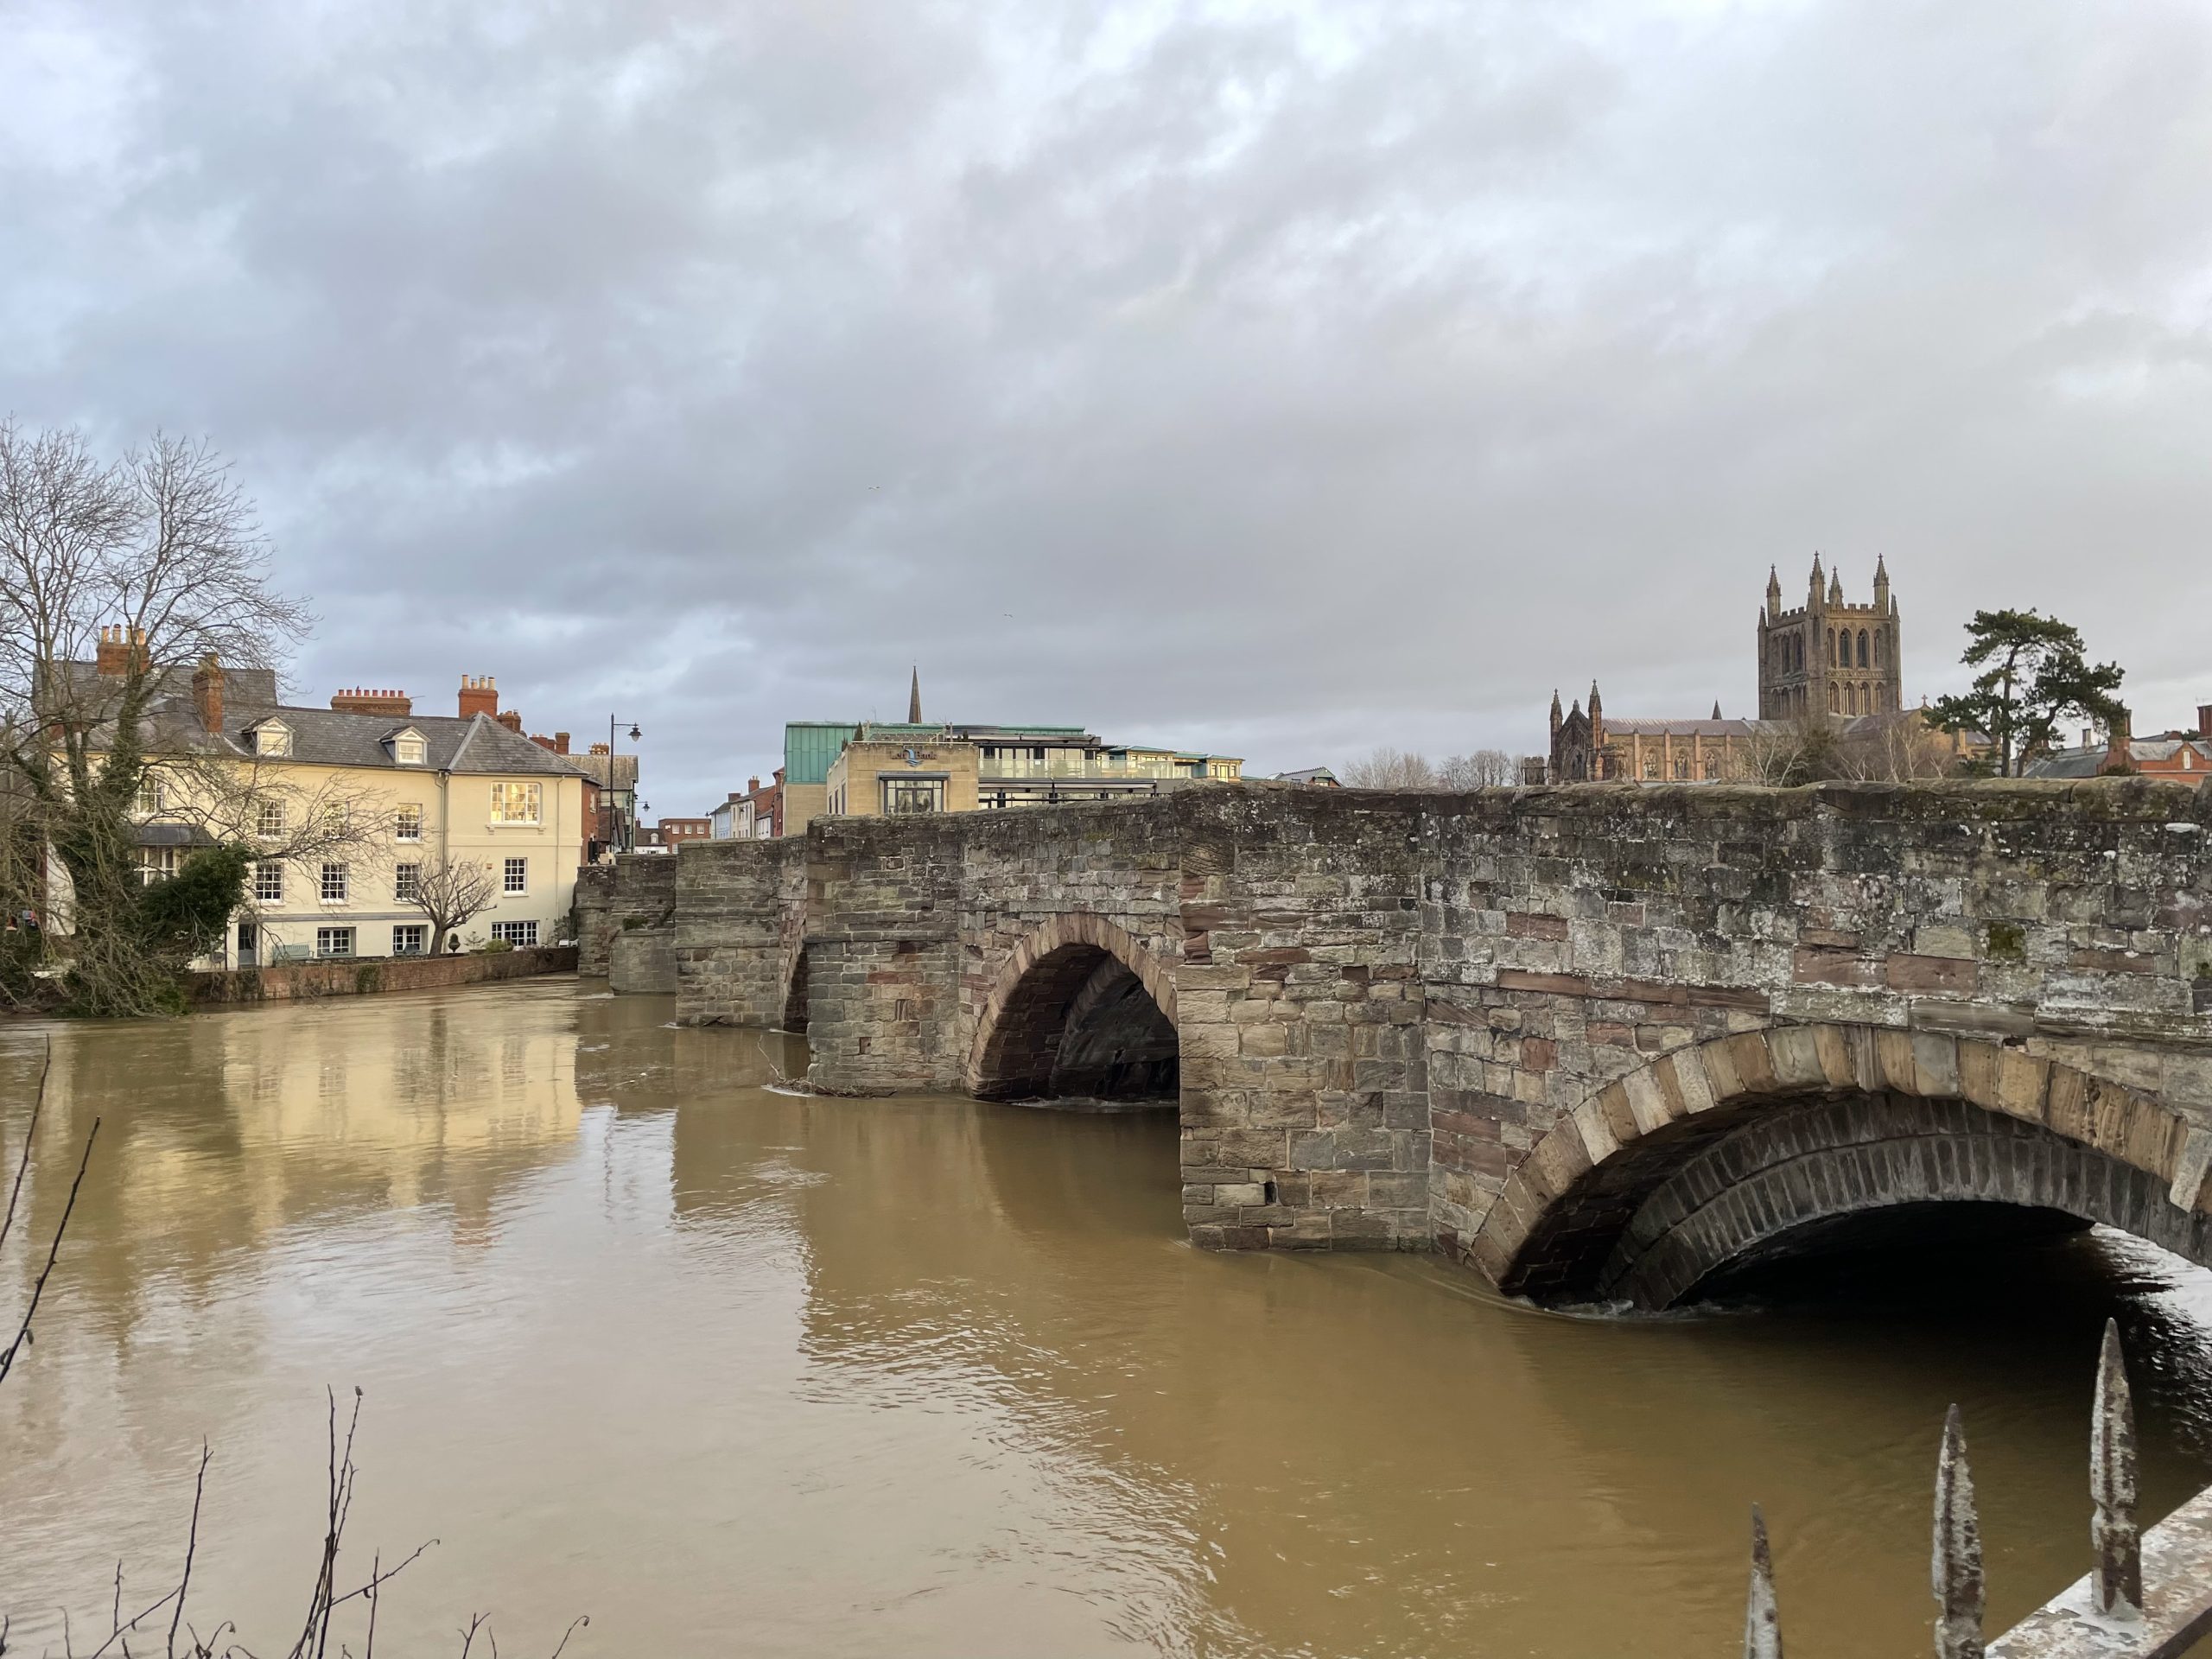 NEWS | Some riverside paths in Hereford are blocked after River Wye burst its banks in Hereford